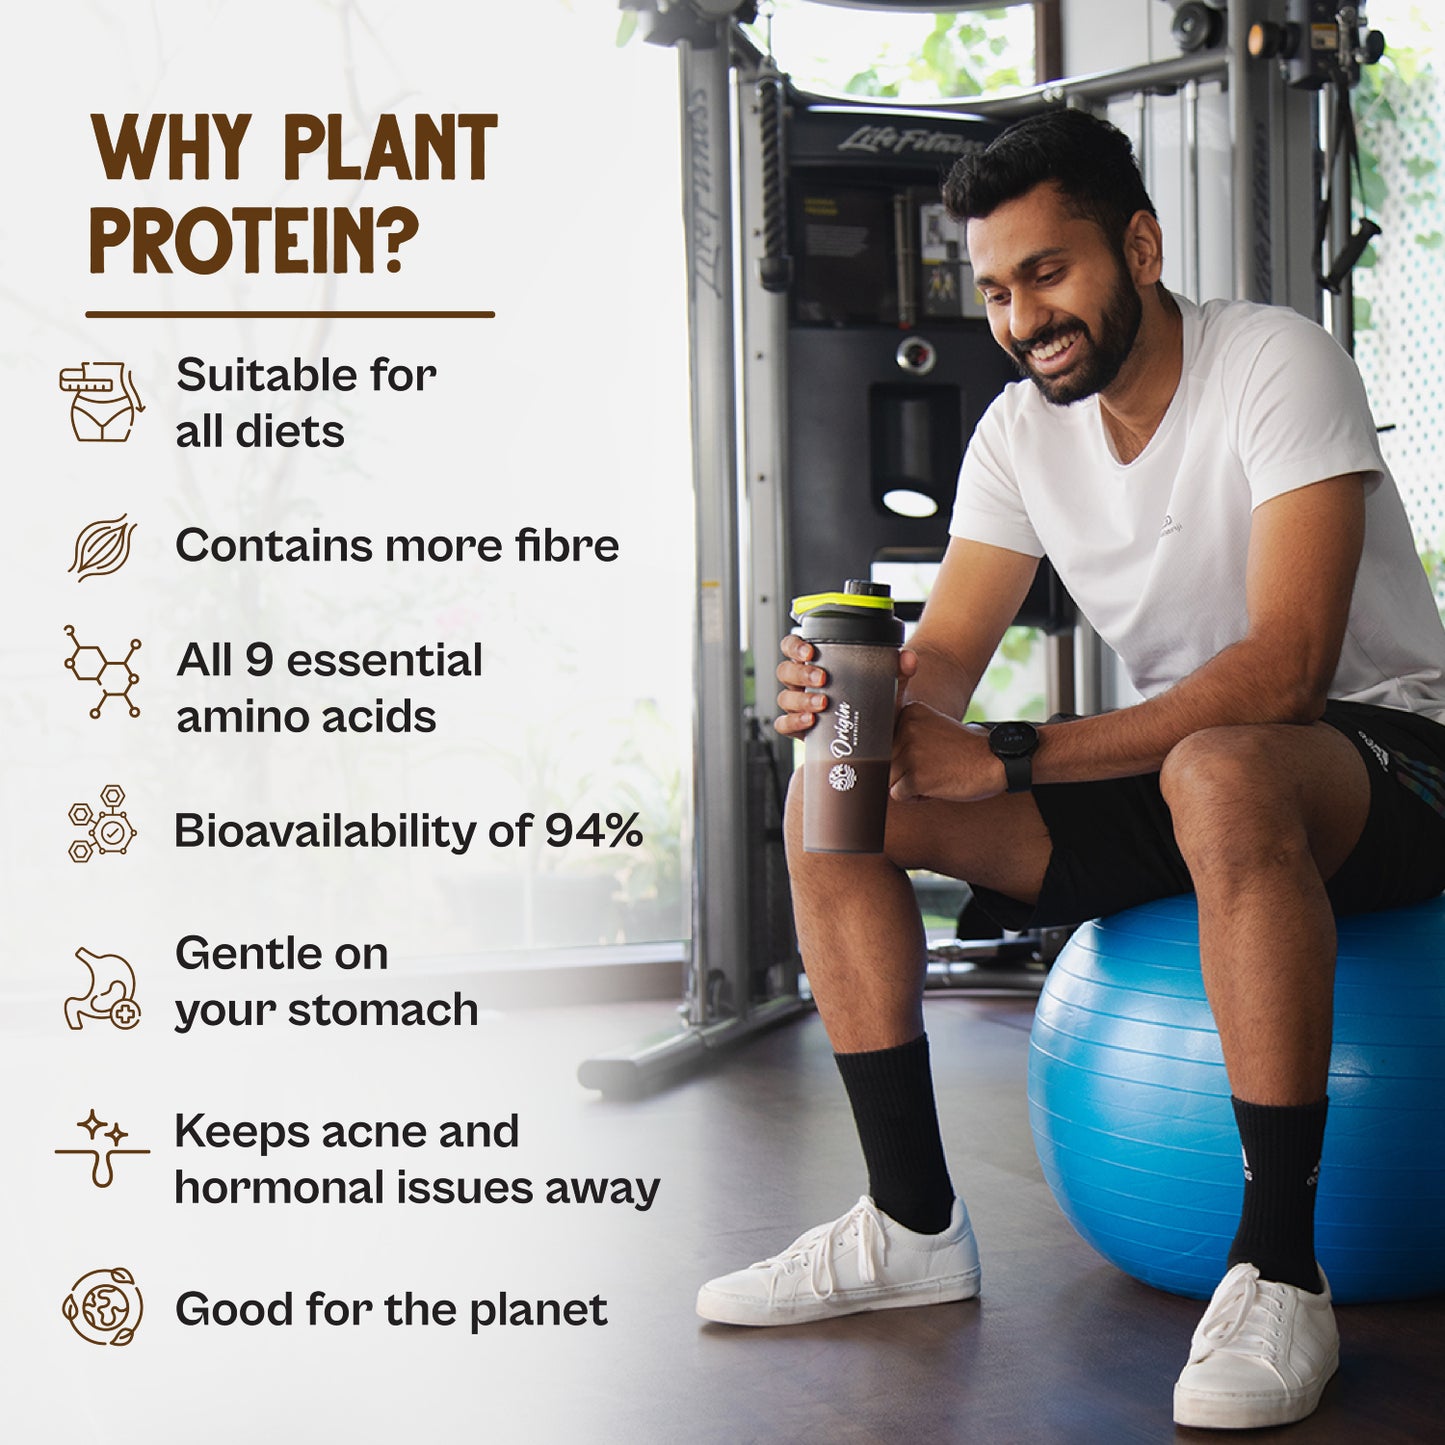 Origin Nutrition Plant Protein Chocolate Trial Pack - 100% Natural | 25g of Protein per sachet | Perfect for Beginners | No Added Sugars | Suitable & Convenient for All Diets (Chocolate)